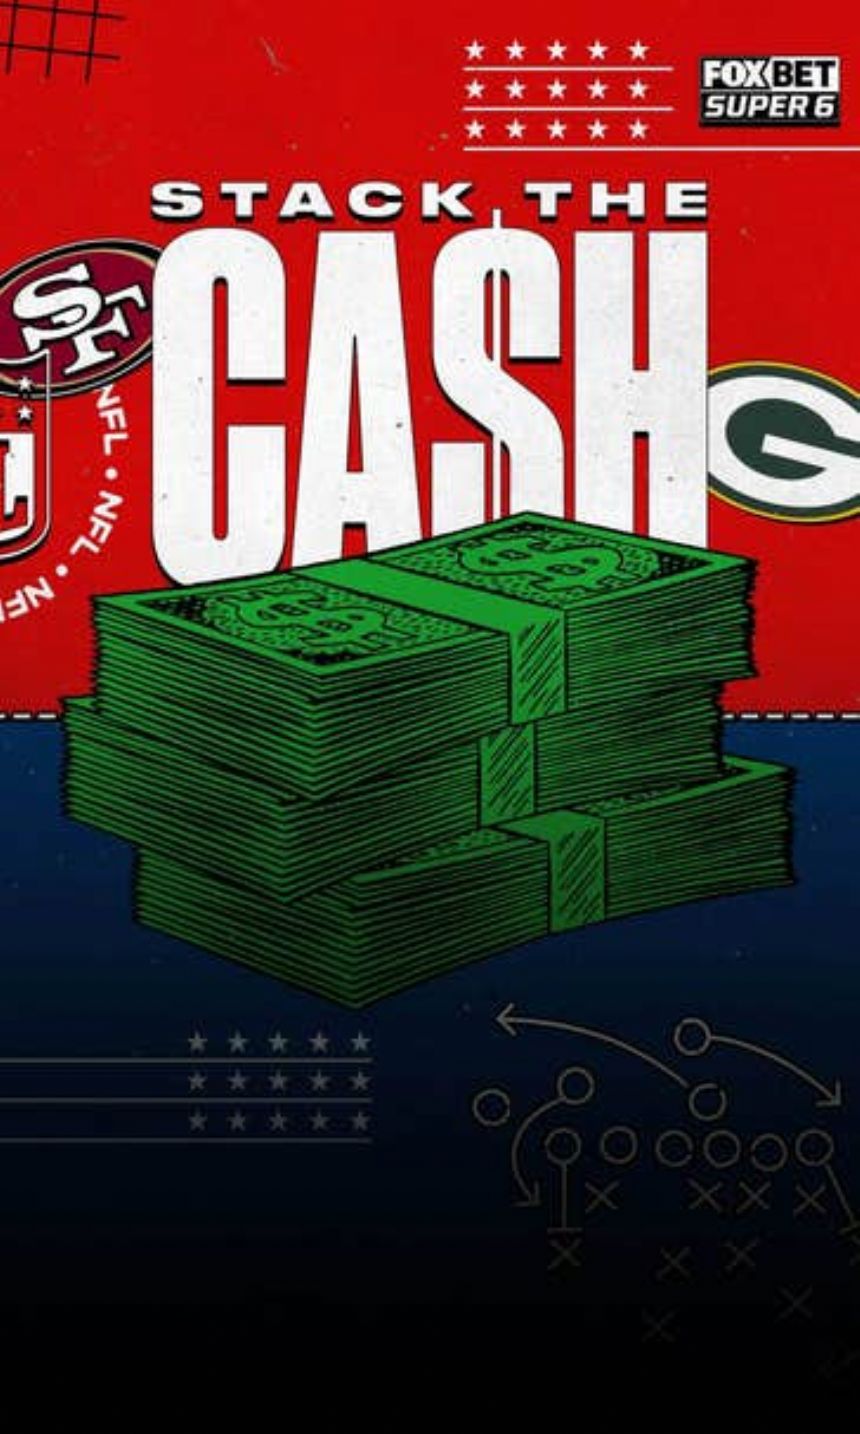 FOX Bet Super 6: 49ers-Packers picks for 'Stack the Cash' jackpot